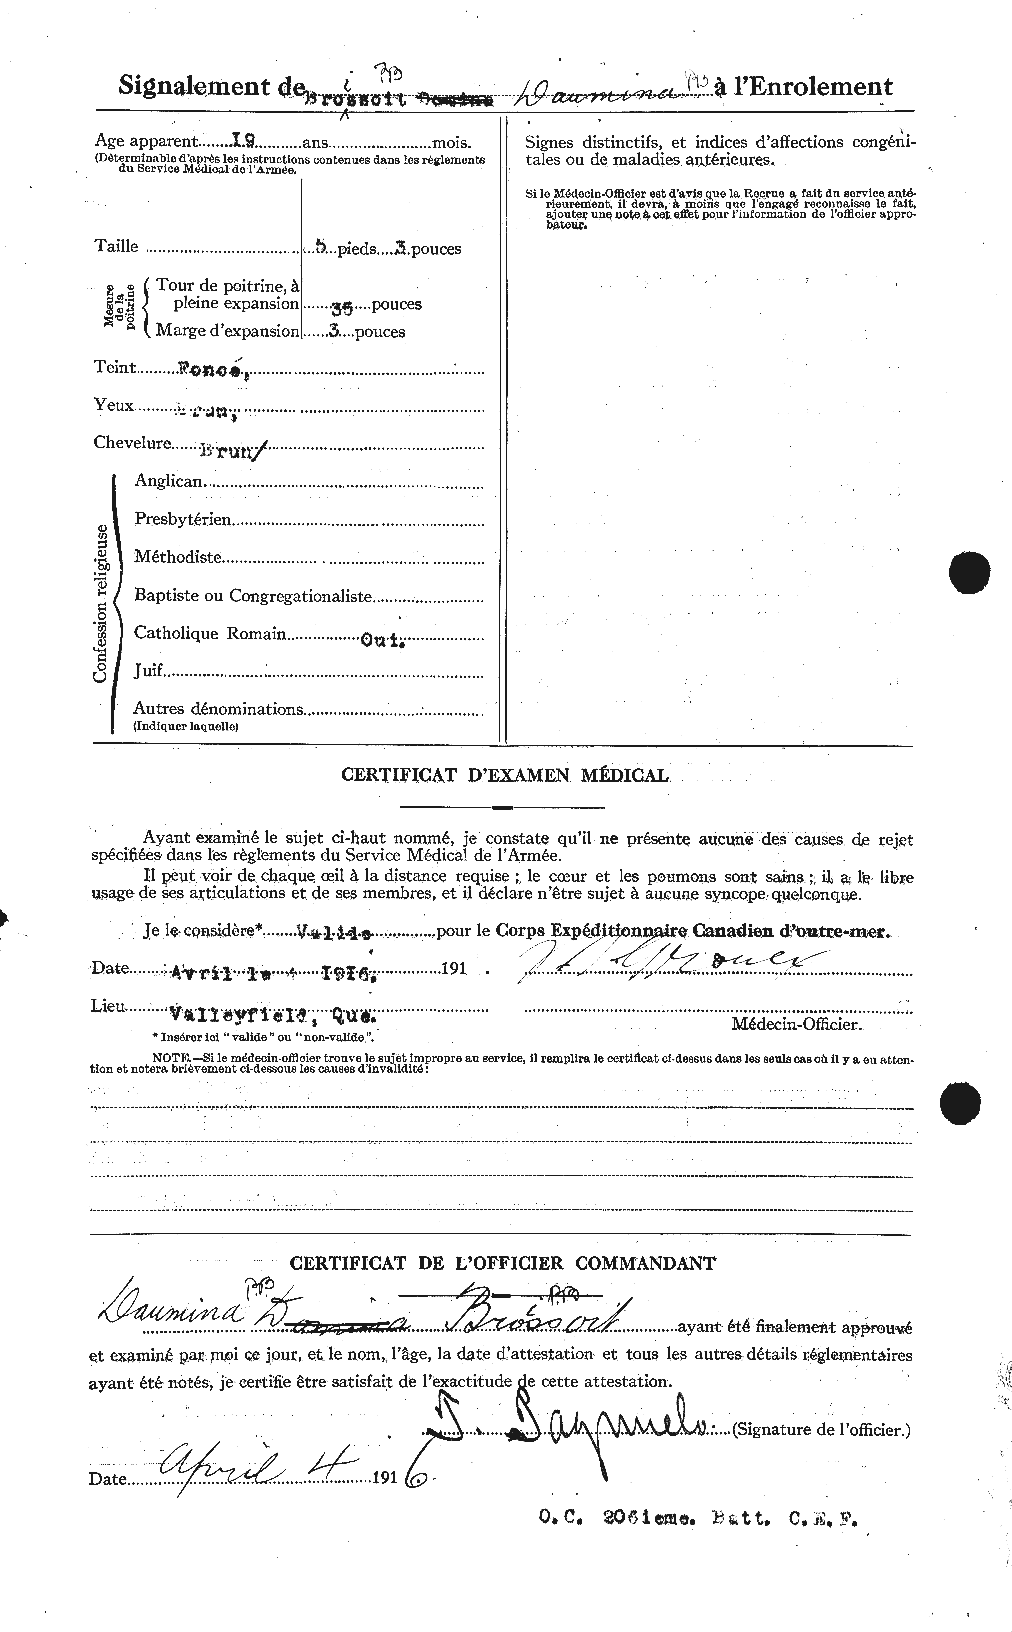 Personnel Records of the First World War - CEF 262098b